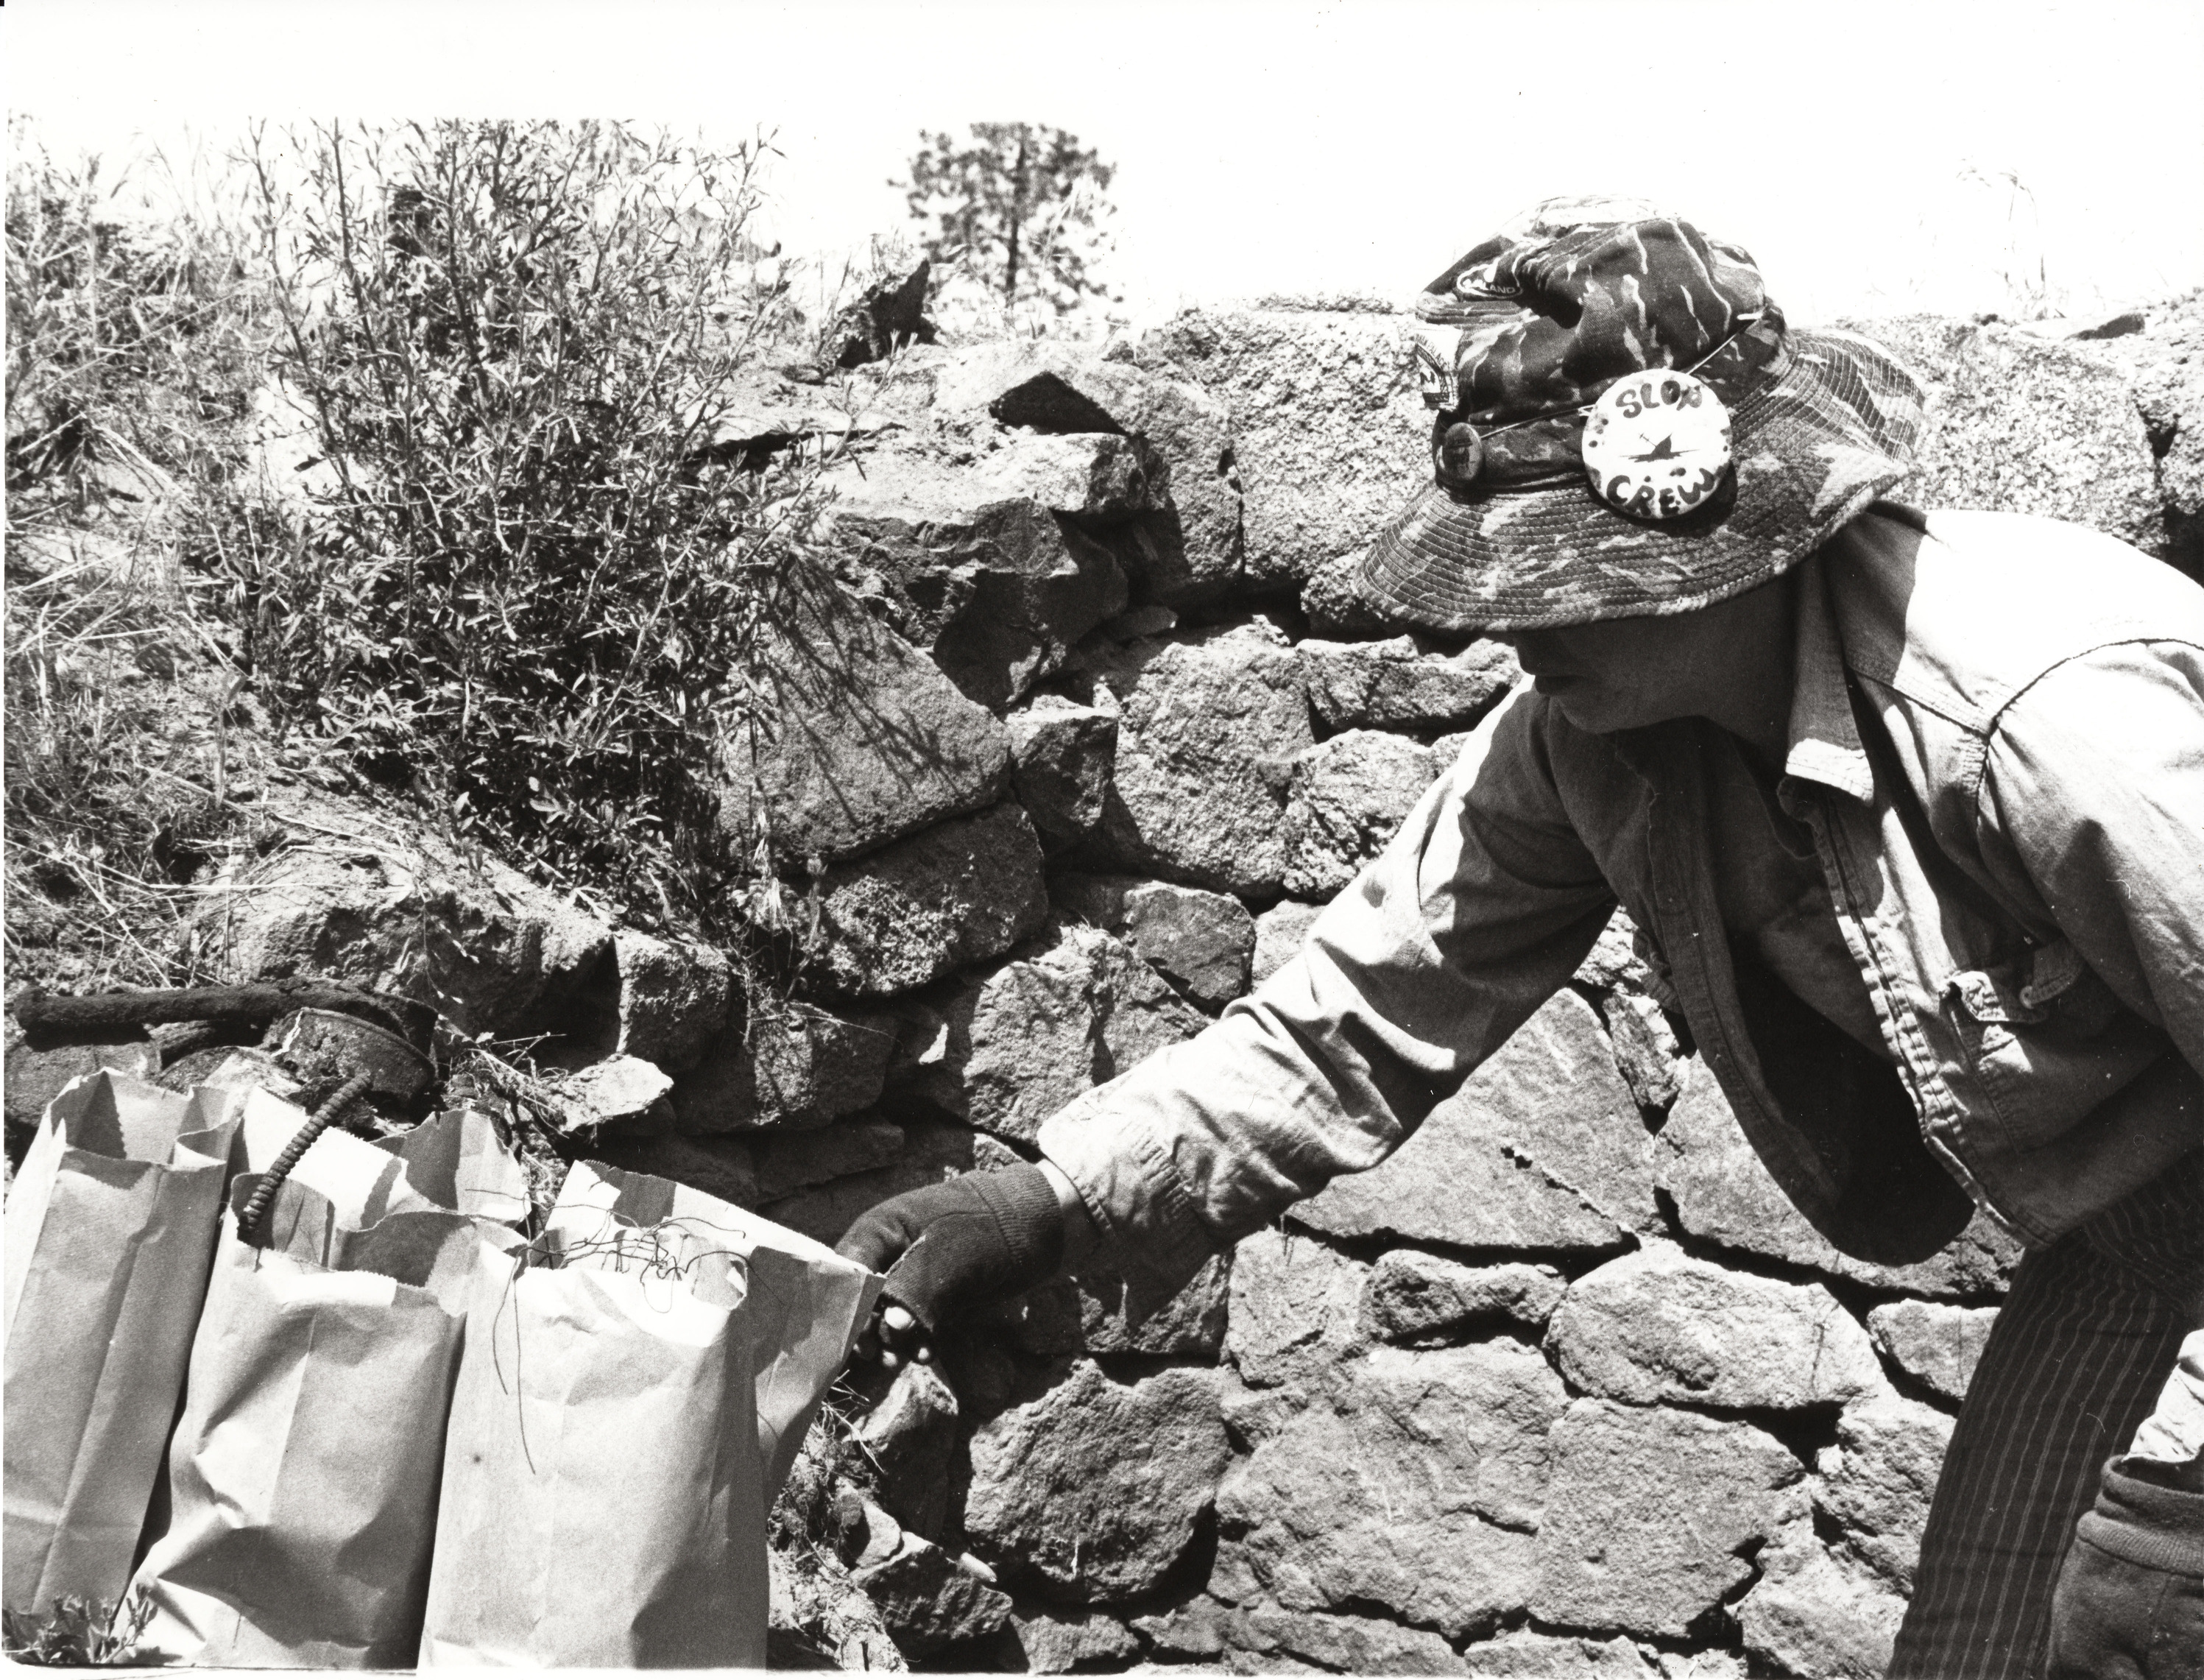 Black and white photograph of a person reaching for some bags